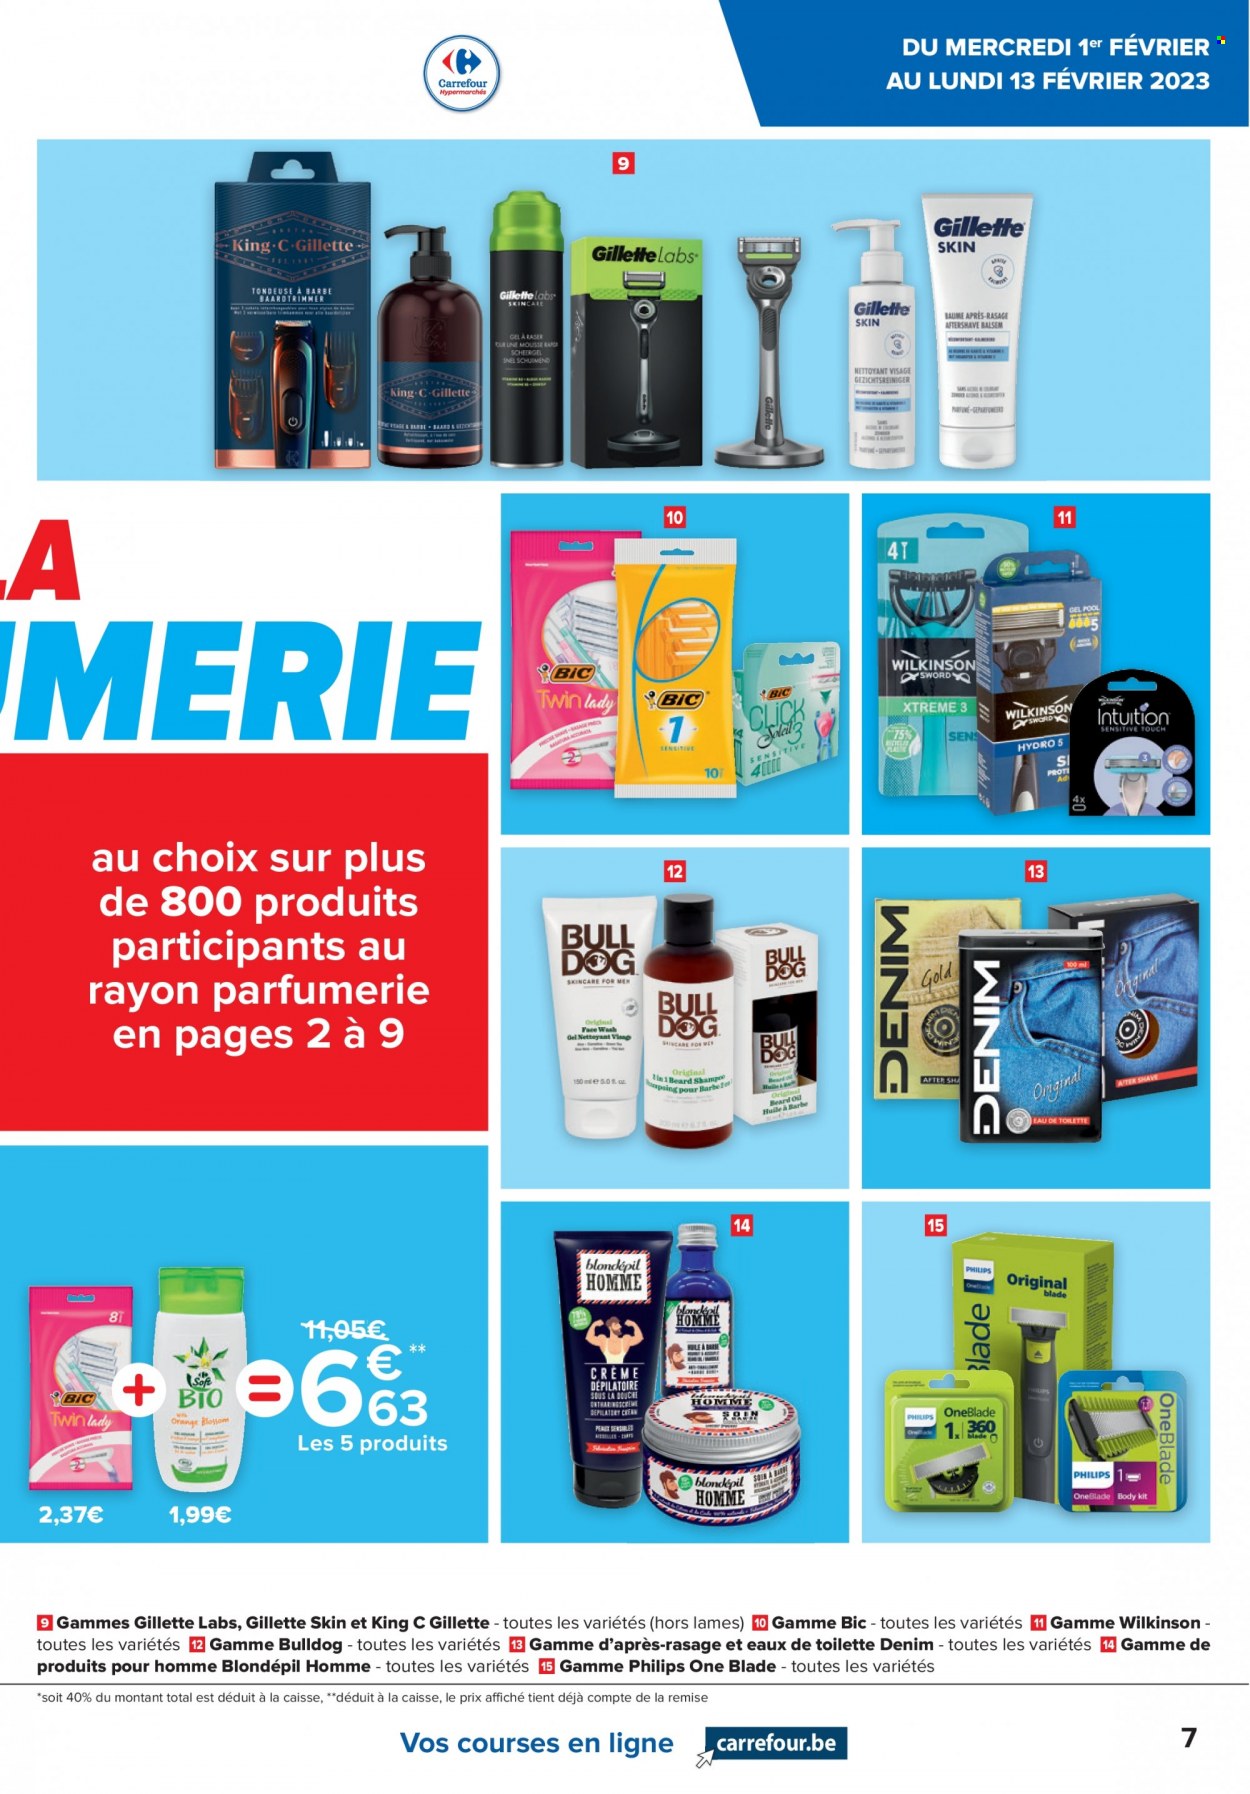 Catalogue Carrefour hypermarkt - 1.2.2023 - 13.2.2023. Page 7.